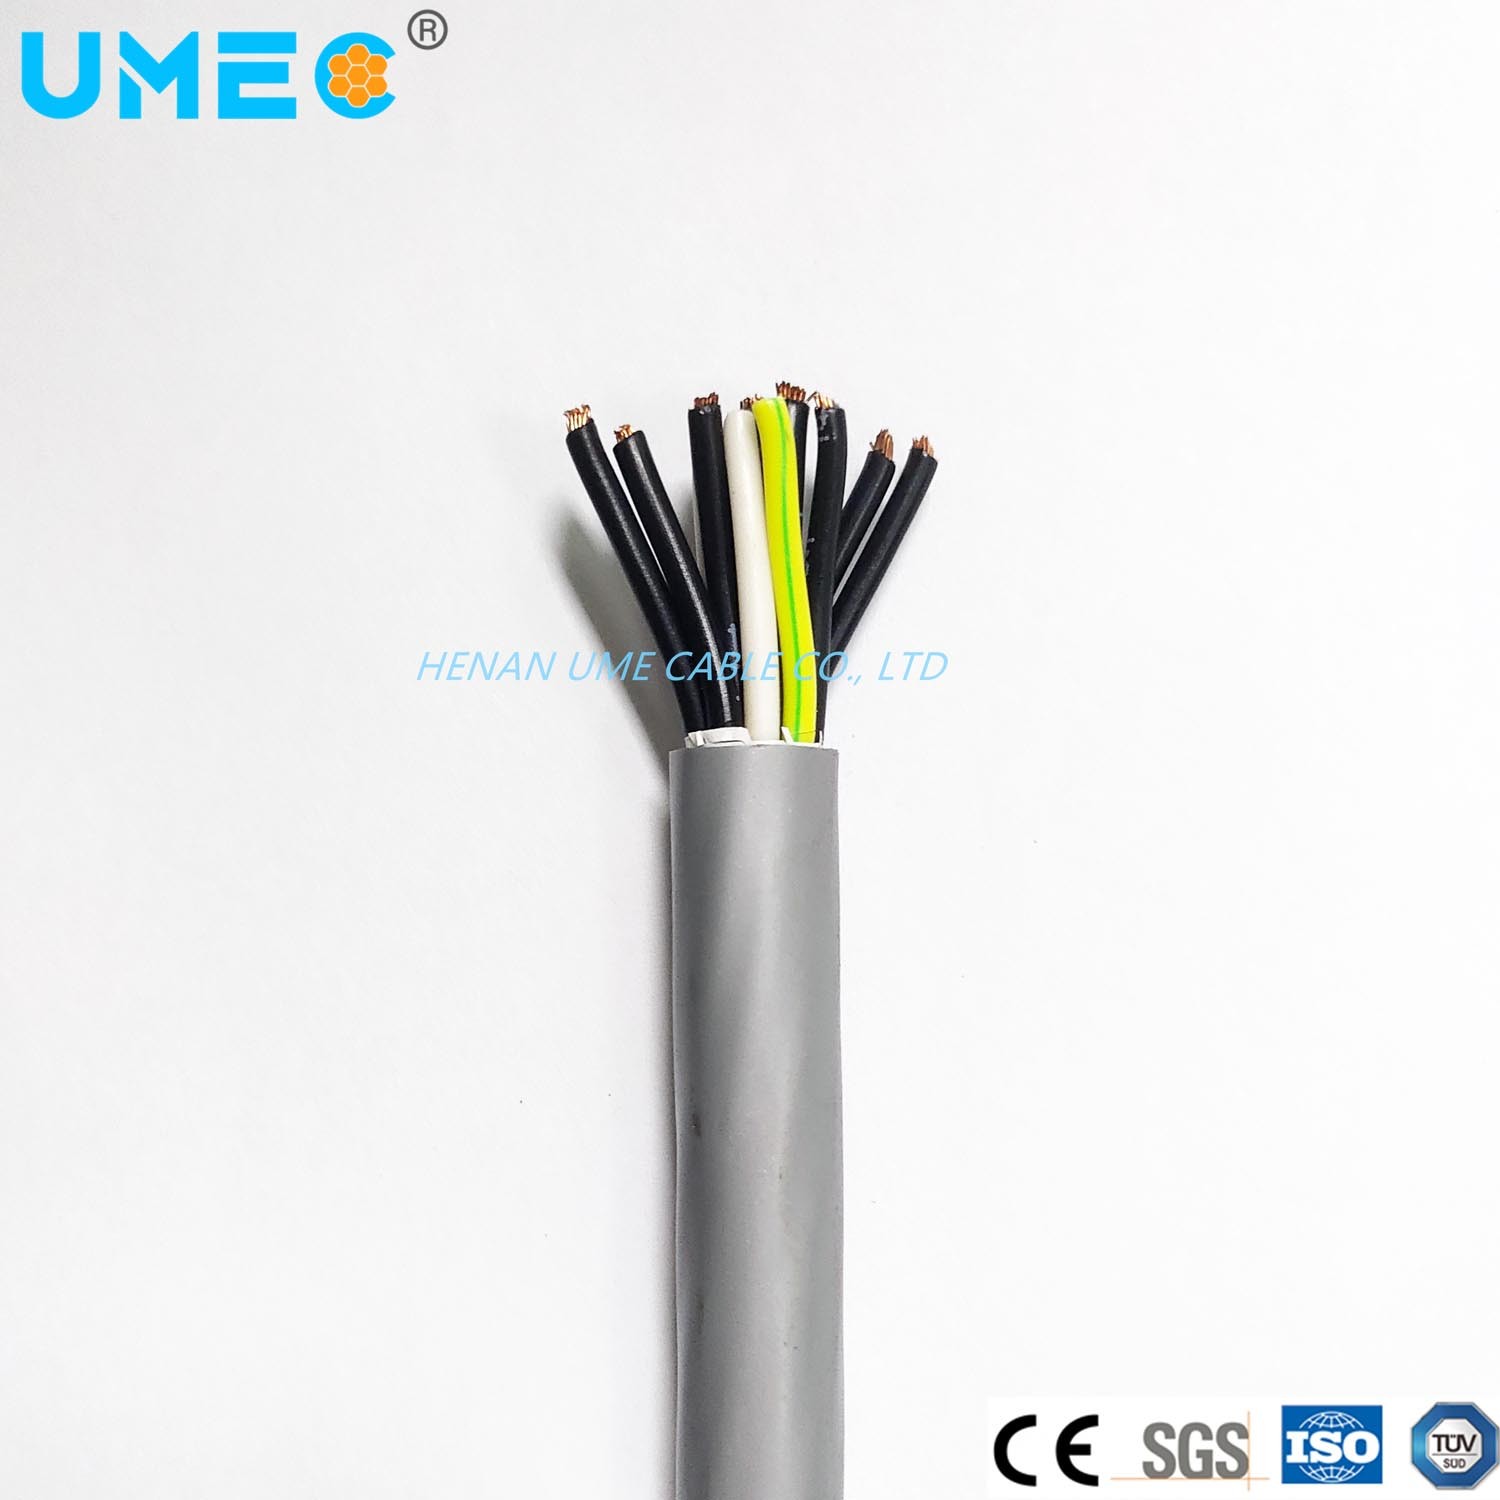 PVC Thermoplastic Control Cable Ysly-Jz/-Jb/-Oz/-Ob PVC Insulated PVC Jacket Flexible Copper Control Cable 1.0 1.5 2.5 4.0 10